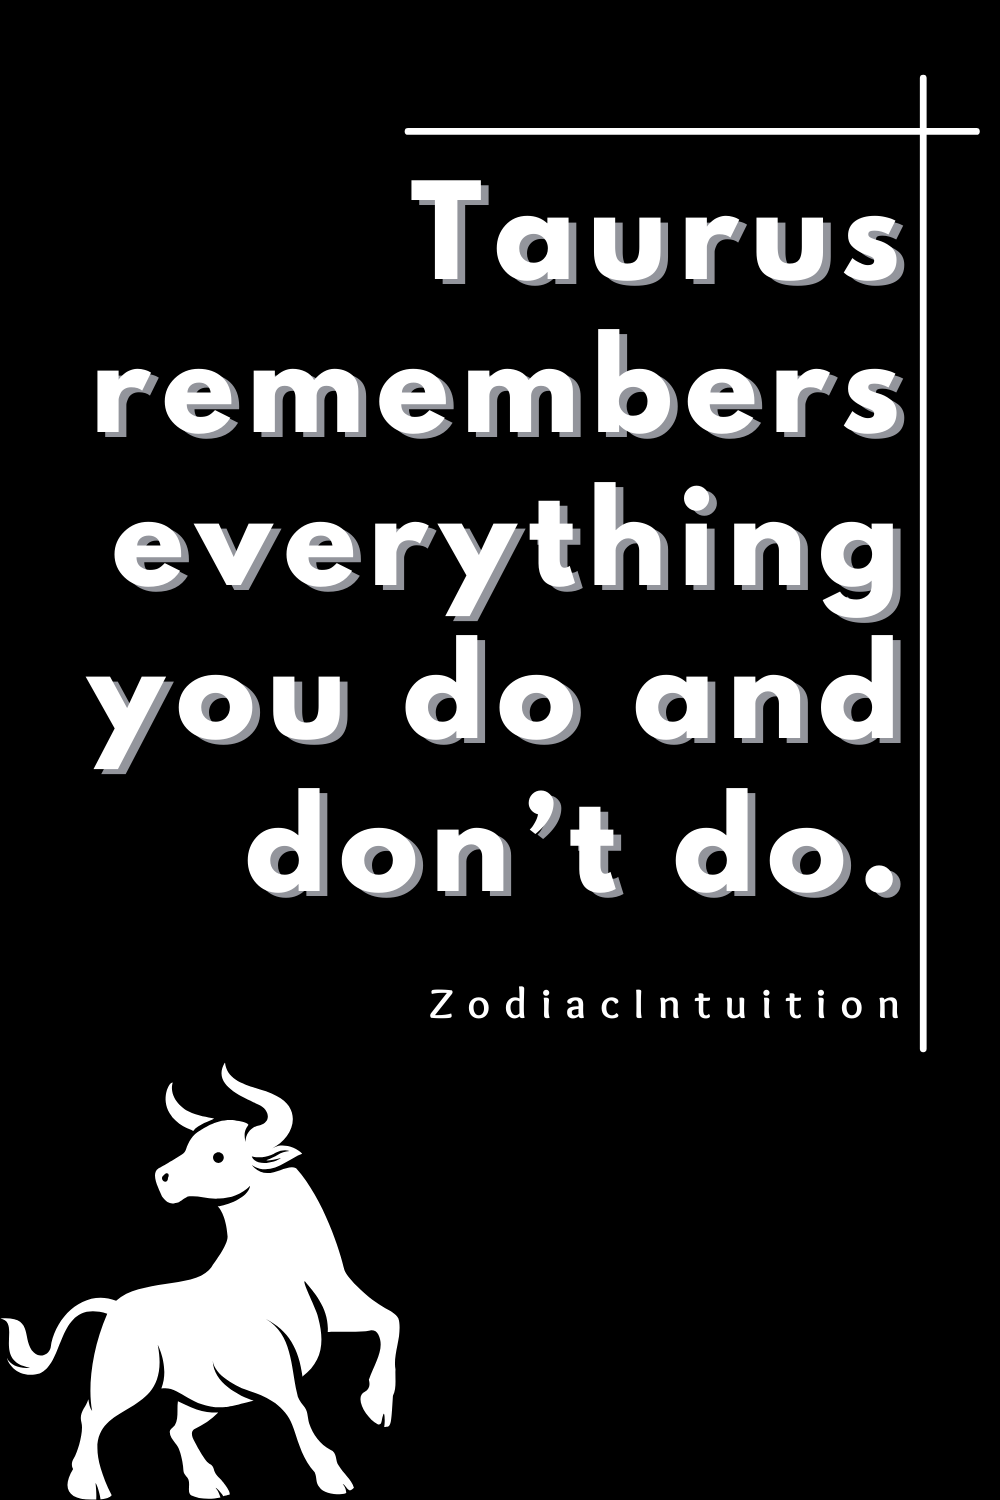 Taurus remembers everything you do and don’t do.